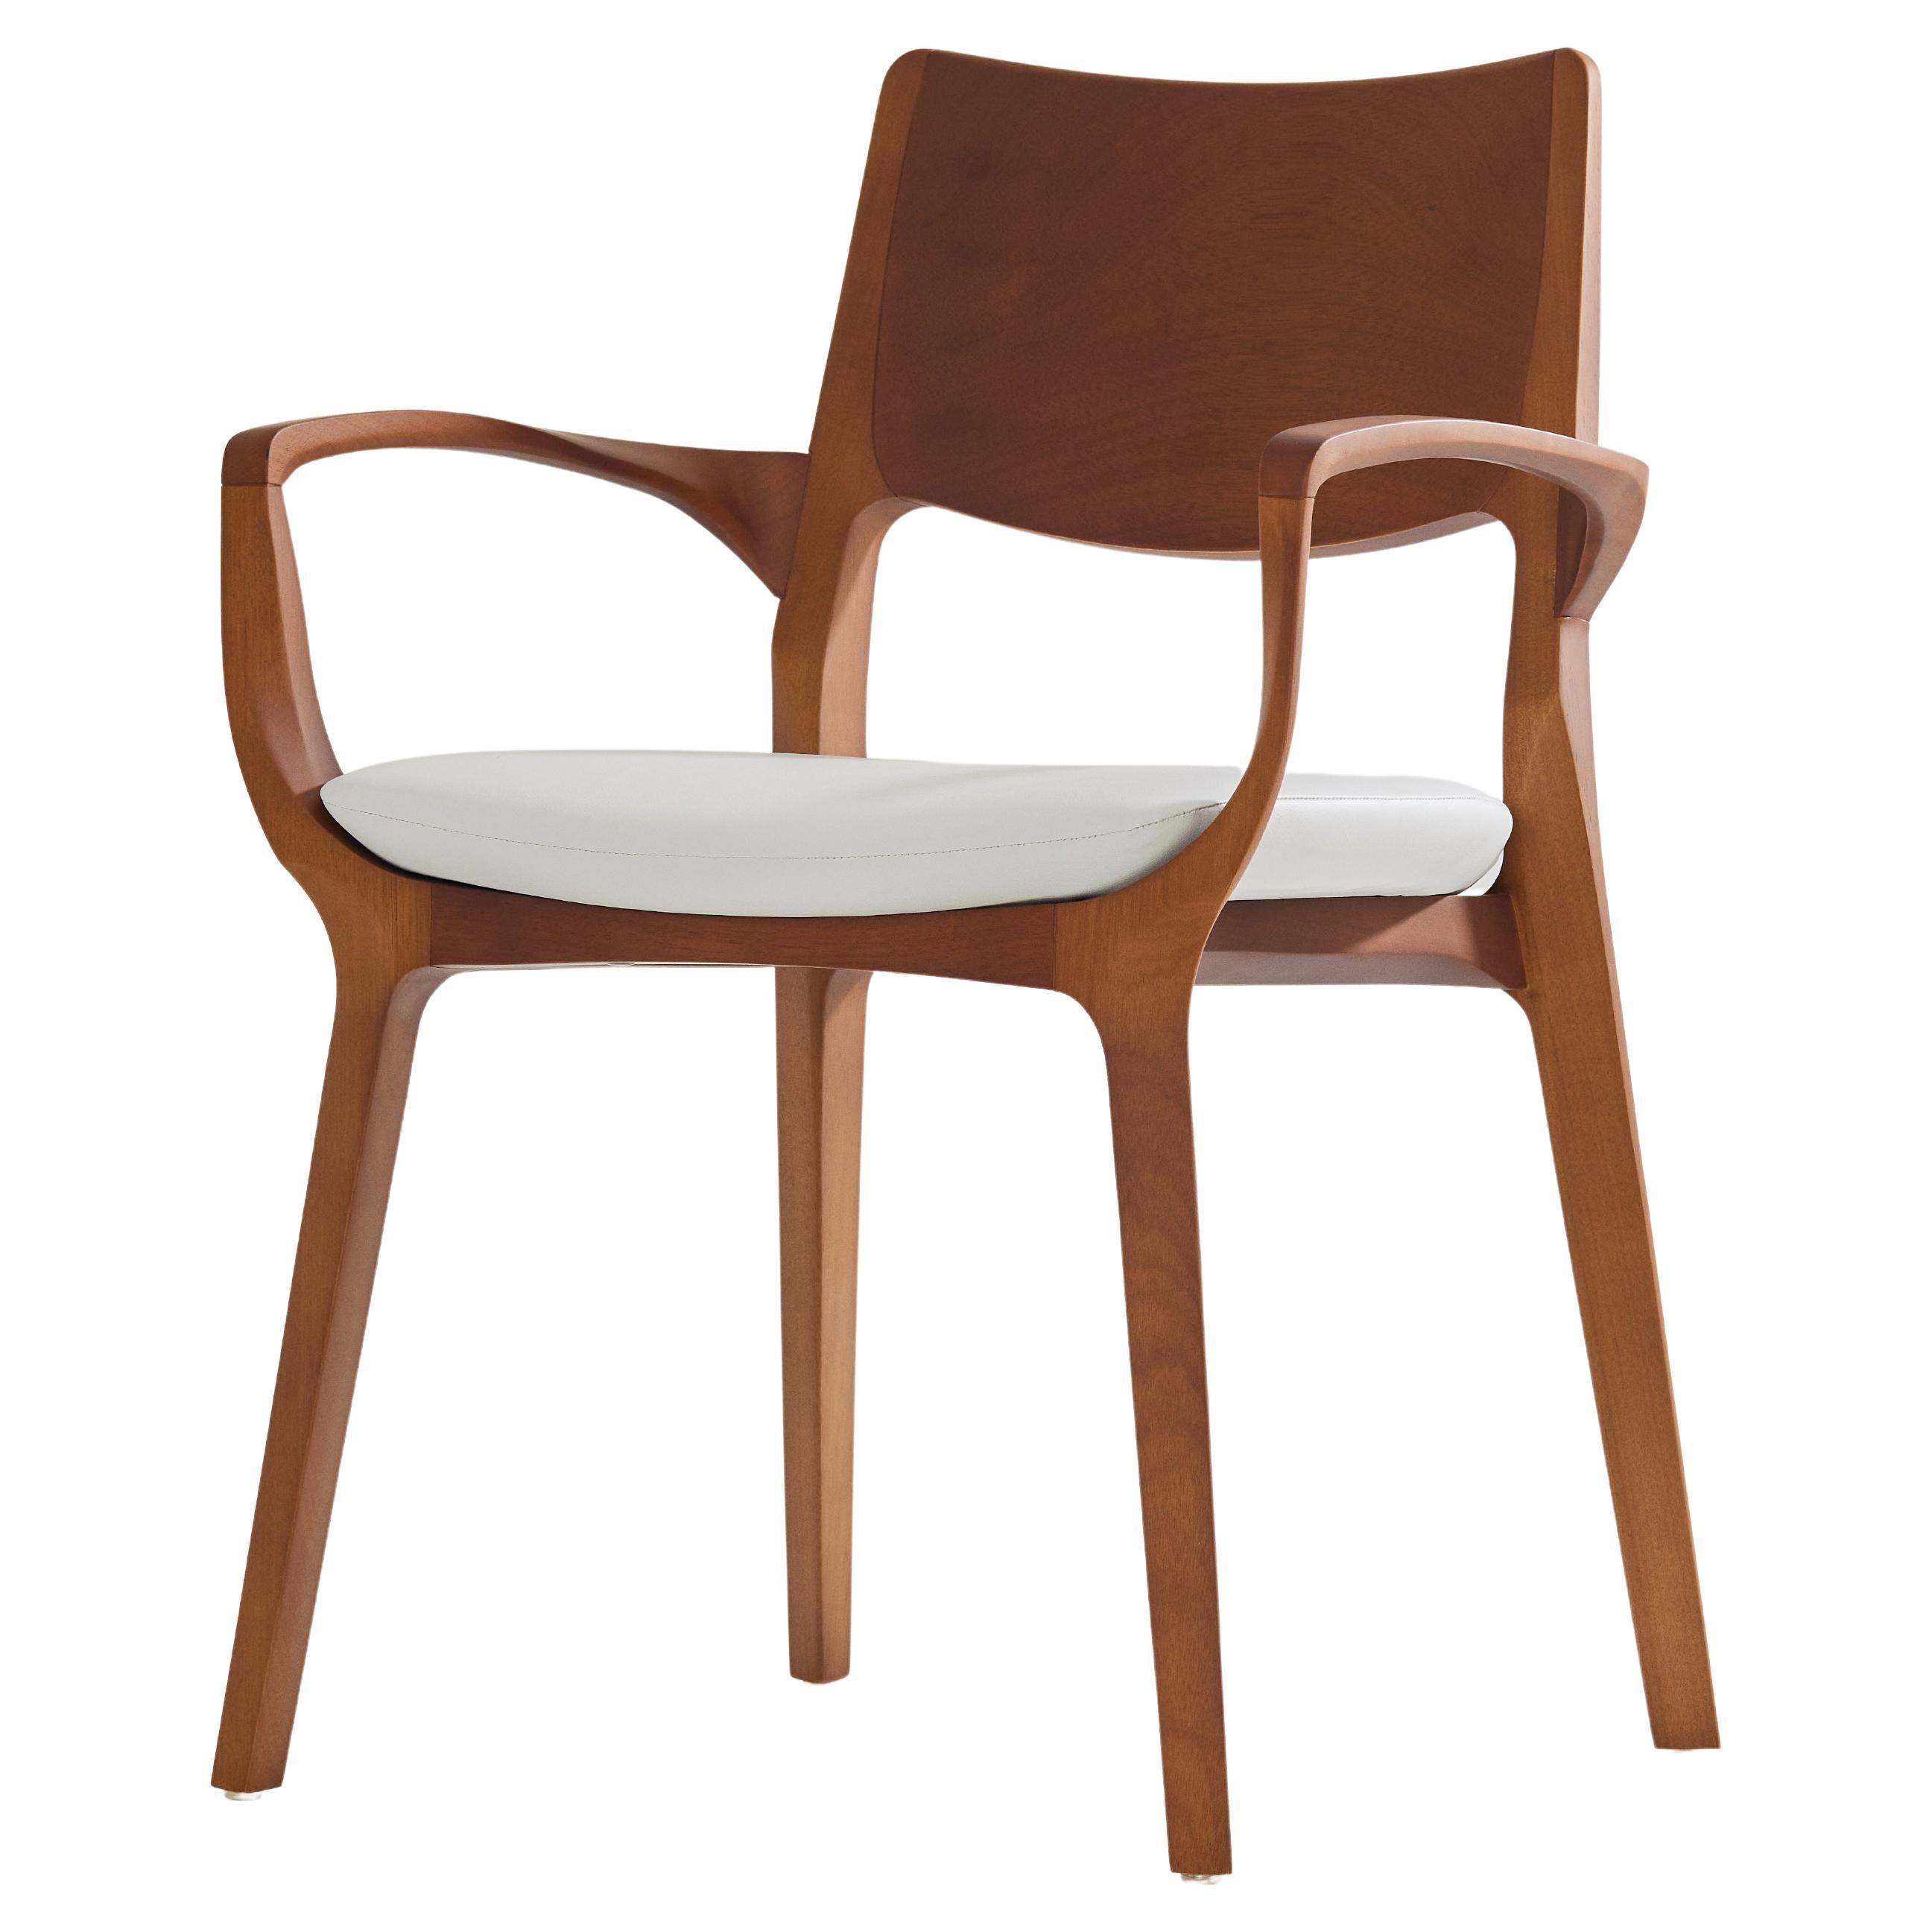 Post-Modern Style Aurora Chair in honey solid wood, vegan leather seating